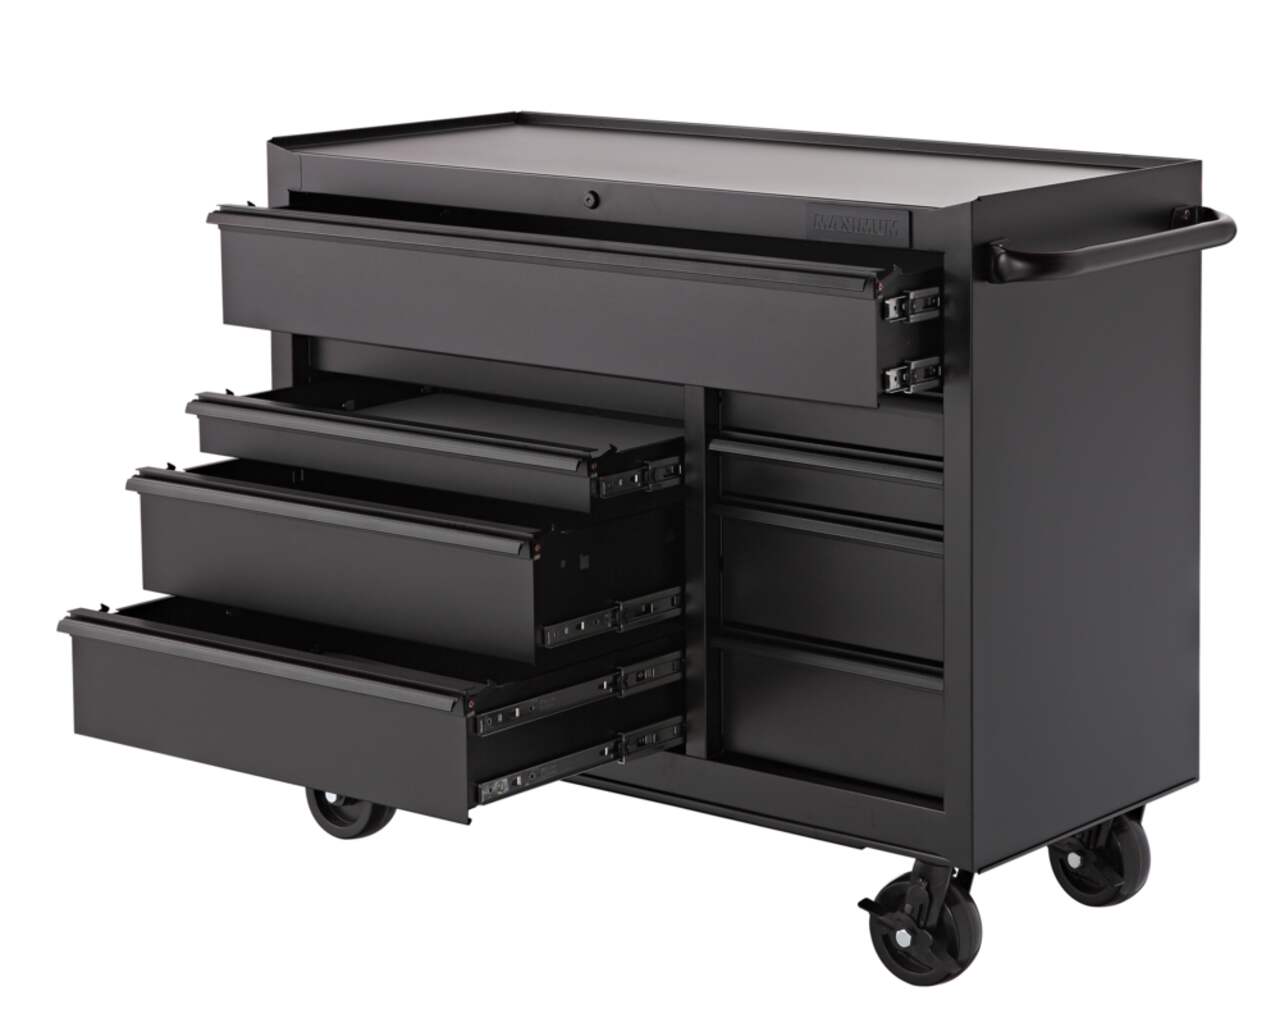 https://media-www.canadiantire.ca/product/fixing/tools/tool-storage/0581377/maximum-41-9-drawer-matte-black-cabinet-7f0e78d6-aa30-42cb-9e9f-bd0f9e5f08a2.png?imdensity=1&imwidth=1244&impolicy=mZoom